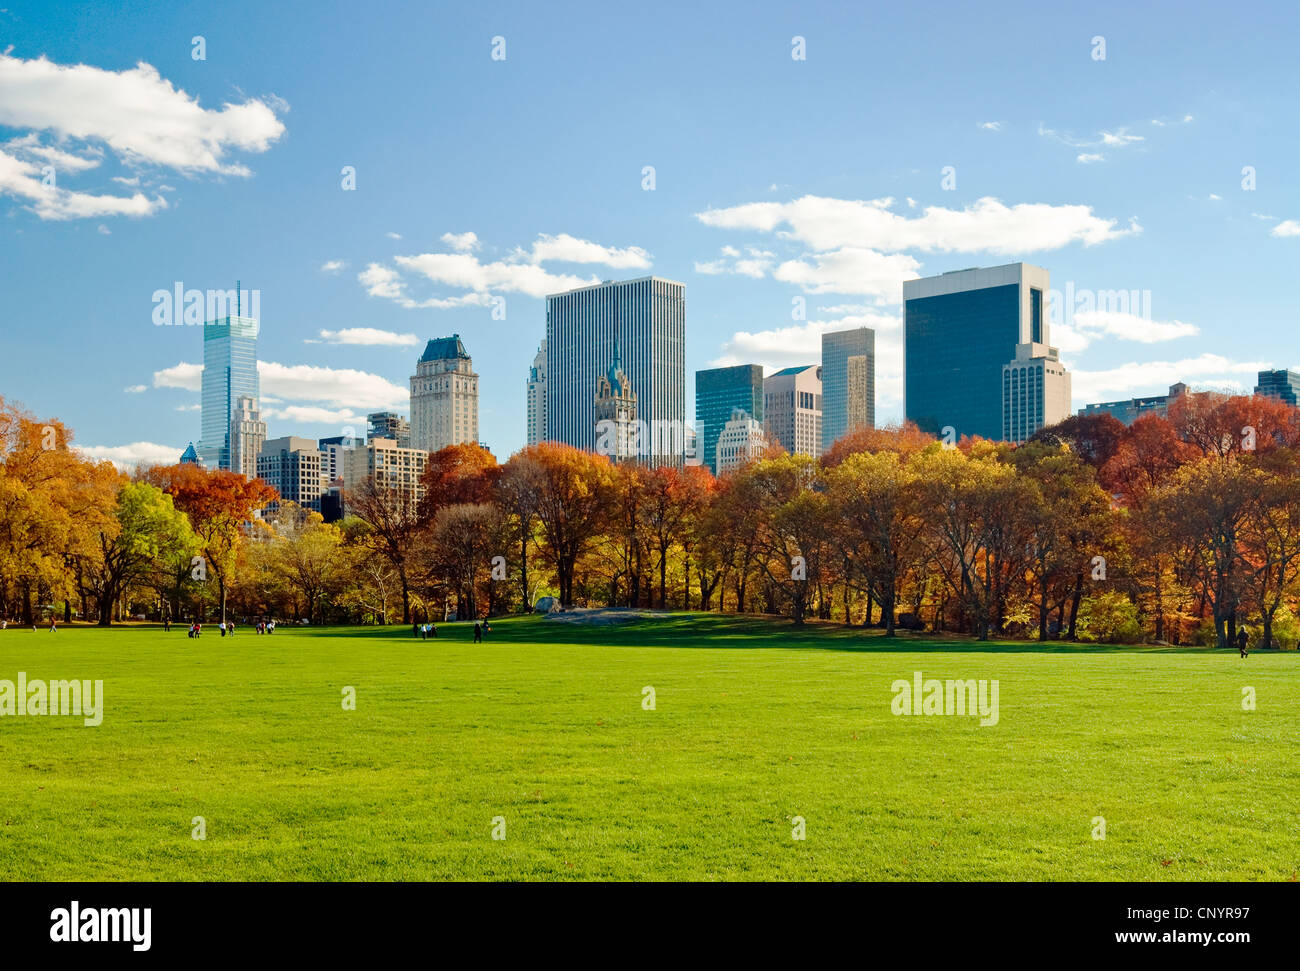 Central Park, New York City, in Autumn, looking towards the Central Park South skyline from Sheep Meadow. Stock Photo